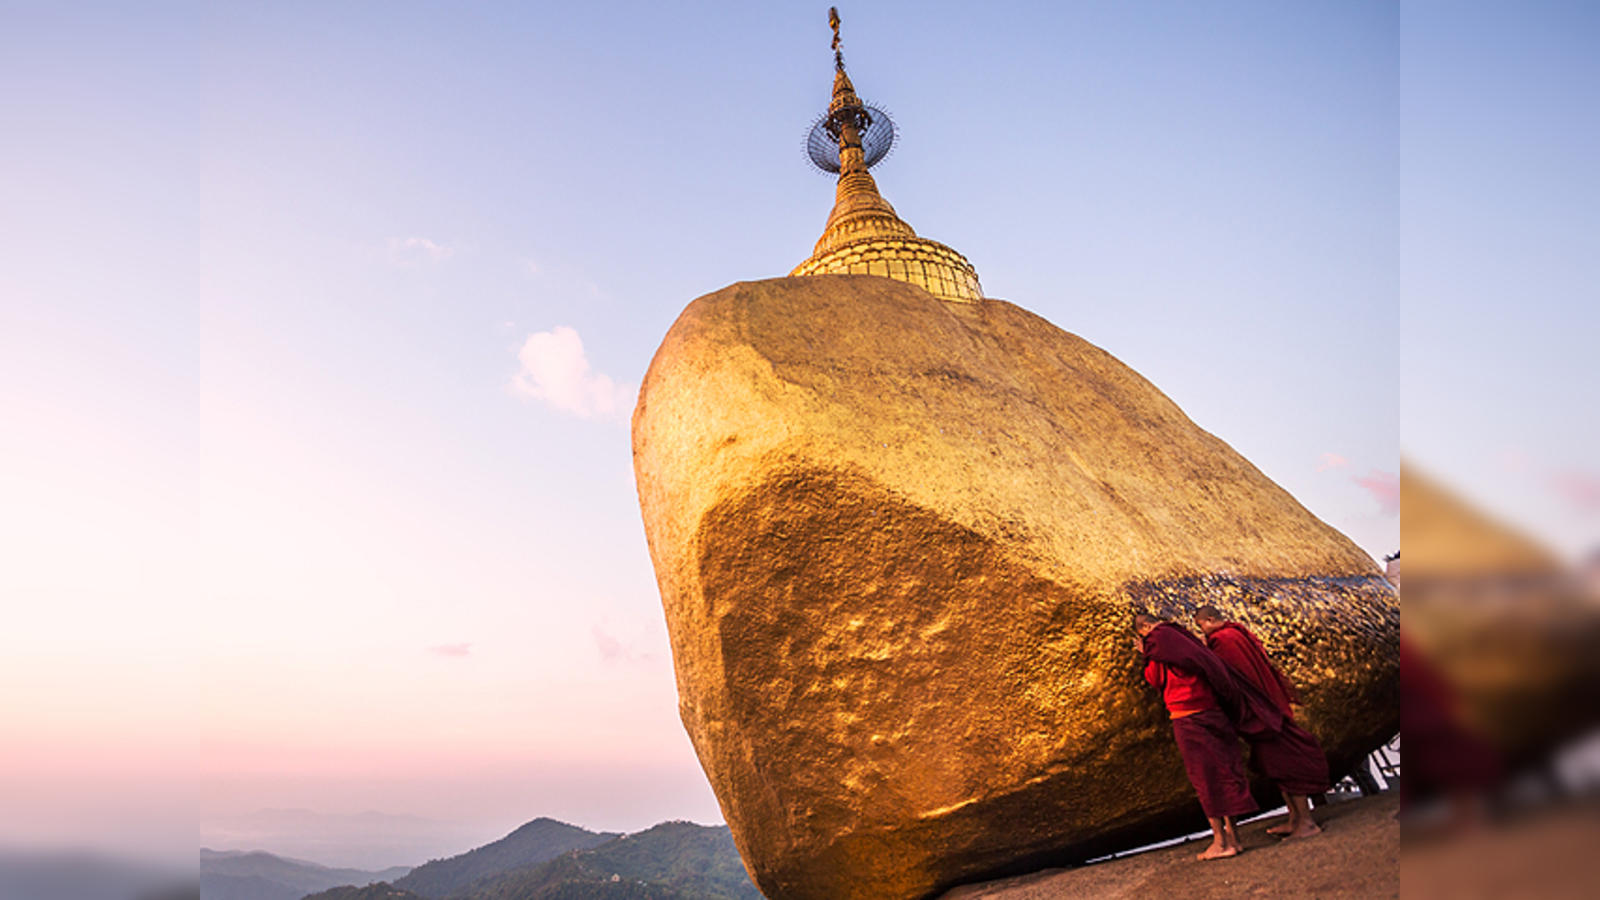 Gain spiritual inspiration from the gravity-defying Golden Rock in Myanmar  - The Economic Times